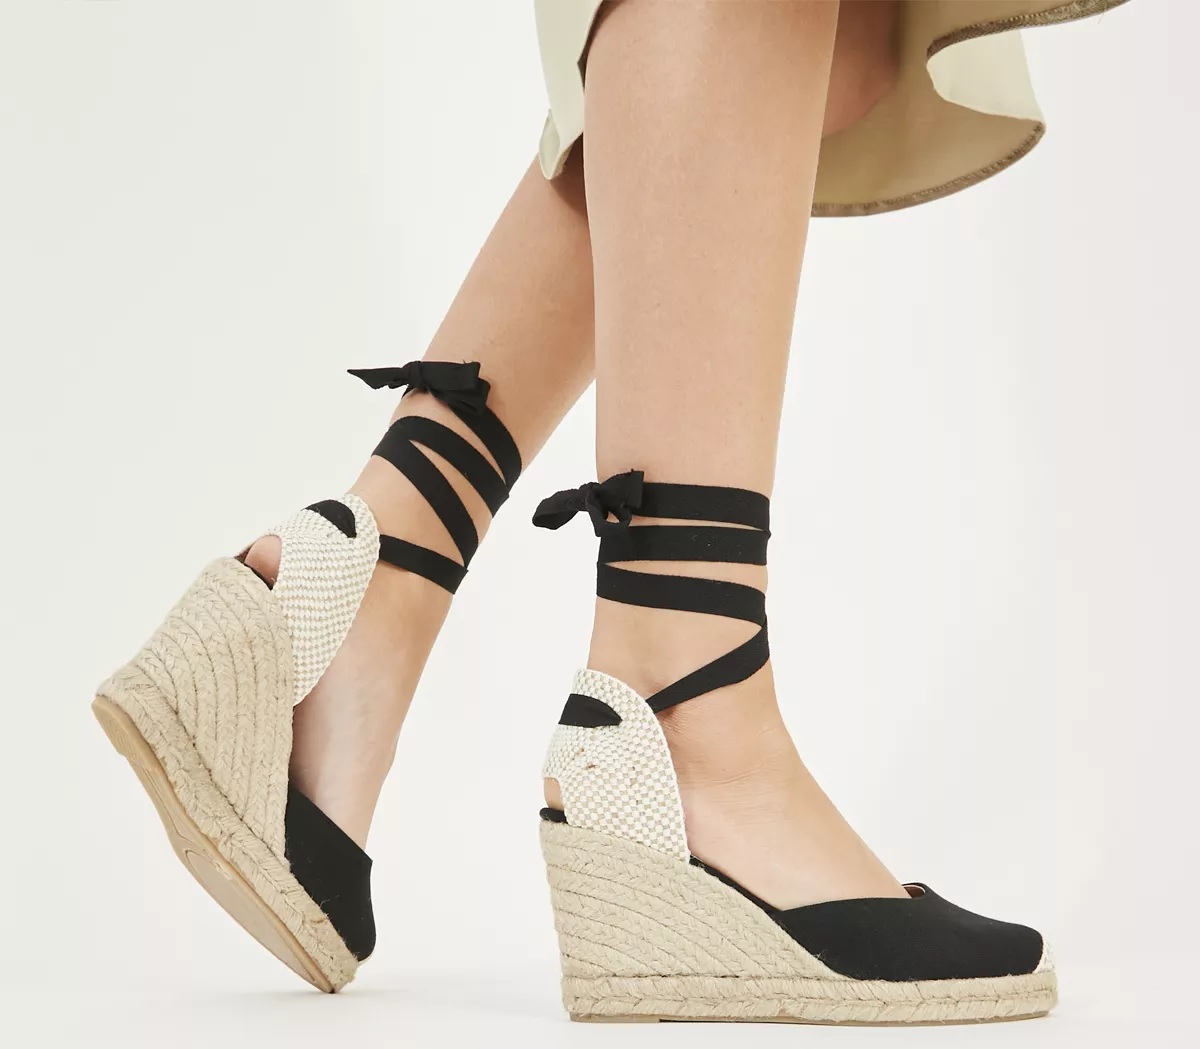 Espadrille wedges for £35 at Office